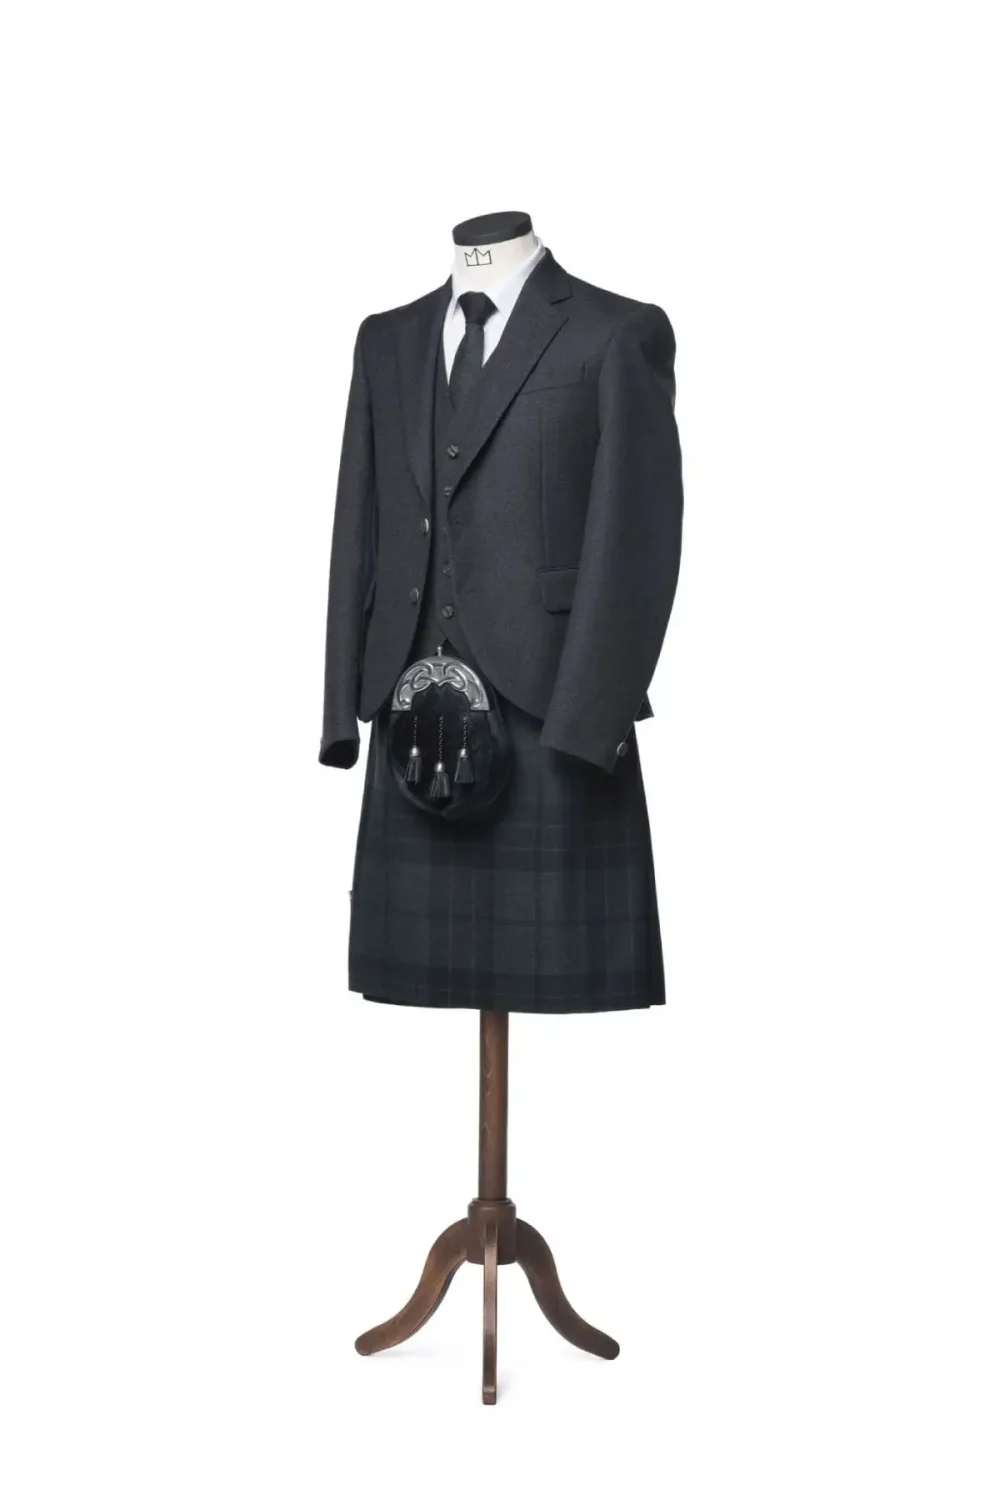 A tilted photo of hanged Tweed Kilt outfit.